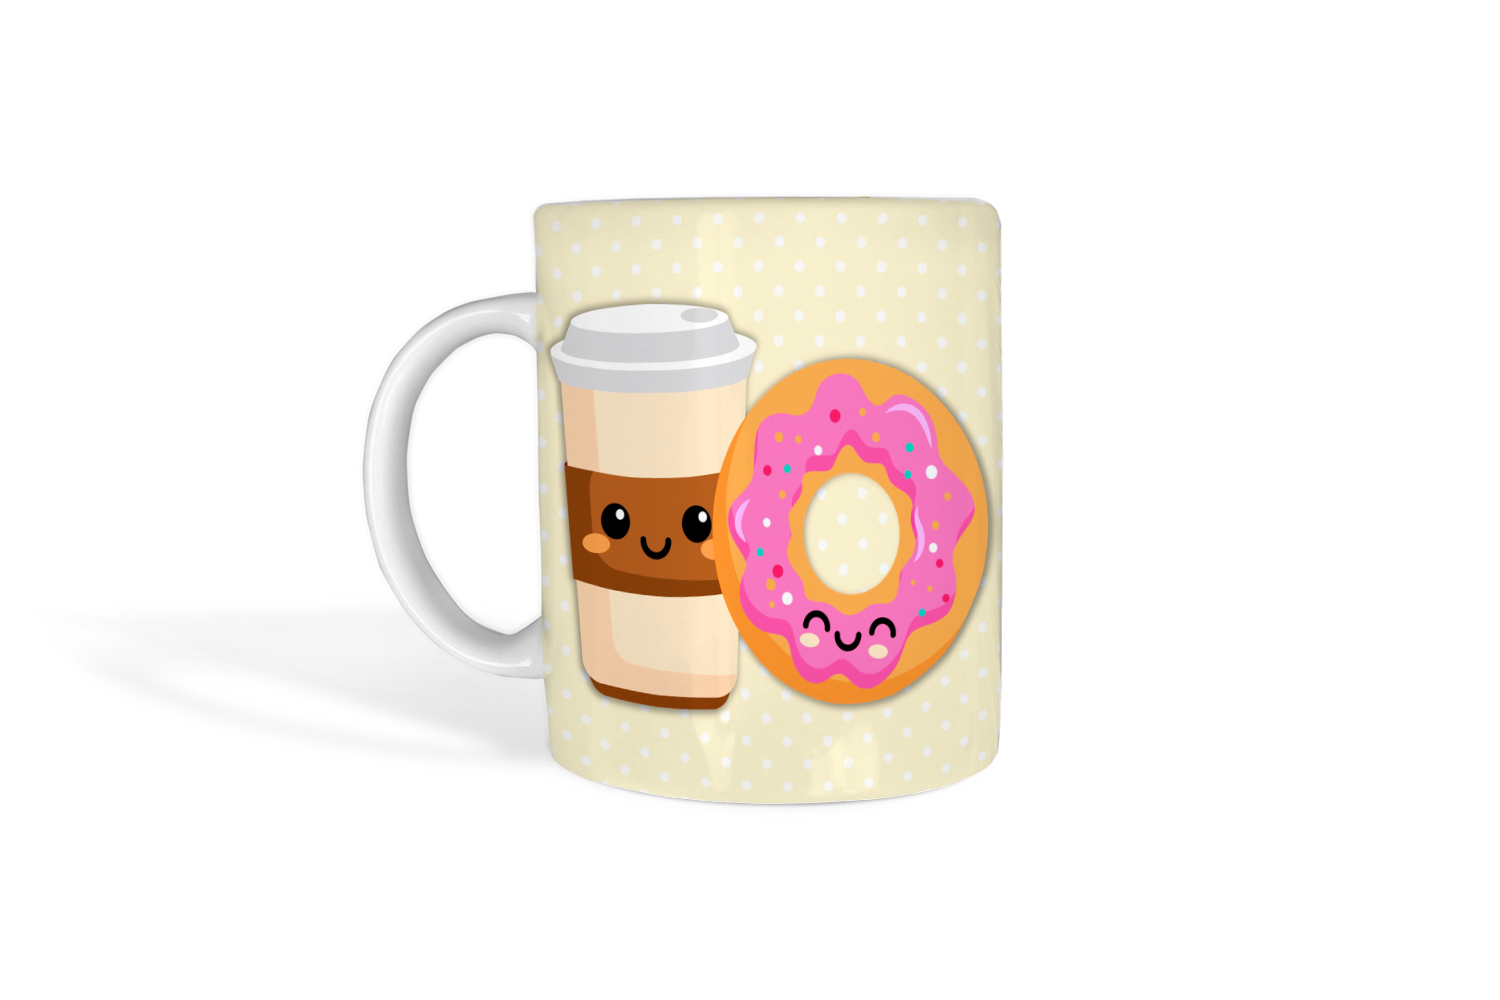 Coffee mug with a donut and a cup of coffee.